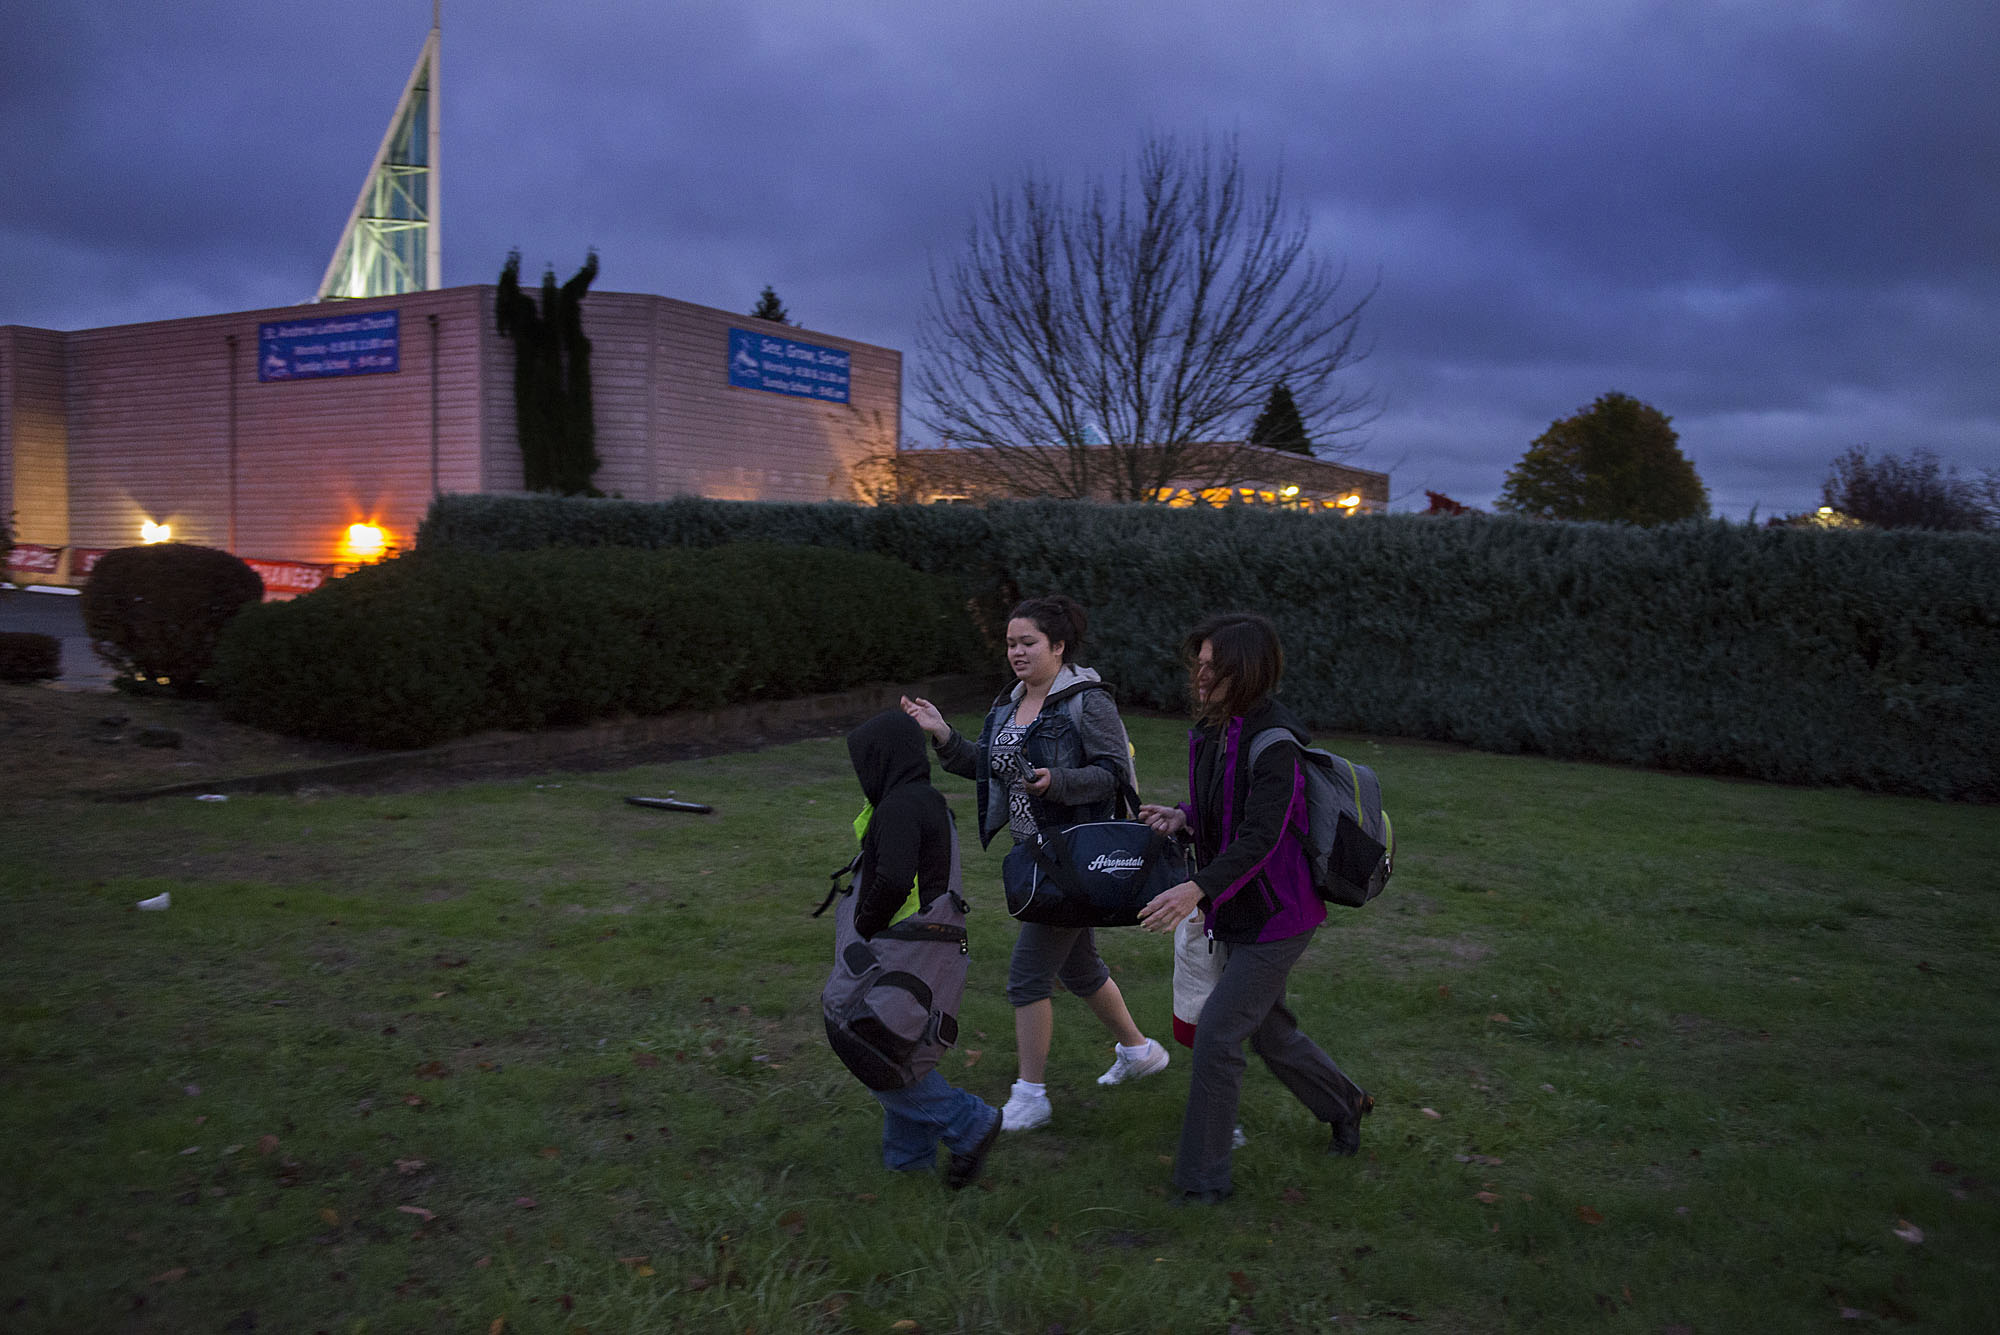 Johnny Pinaula, 7, from left, joins his sister, Shyanne Tanguileg, 16, and his mom, Donna Pinaula, as they leave St. Andrew Lutheran Church before sunrise to start their day Tuesday morning, Nov. 17, 2015 in Vancouver. (Amanda Cowan/The Columbian)